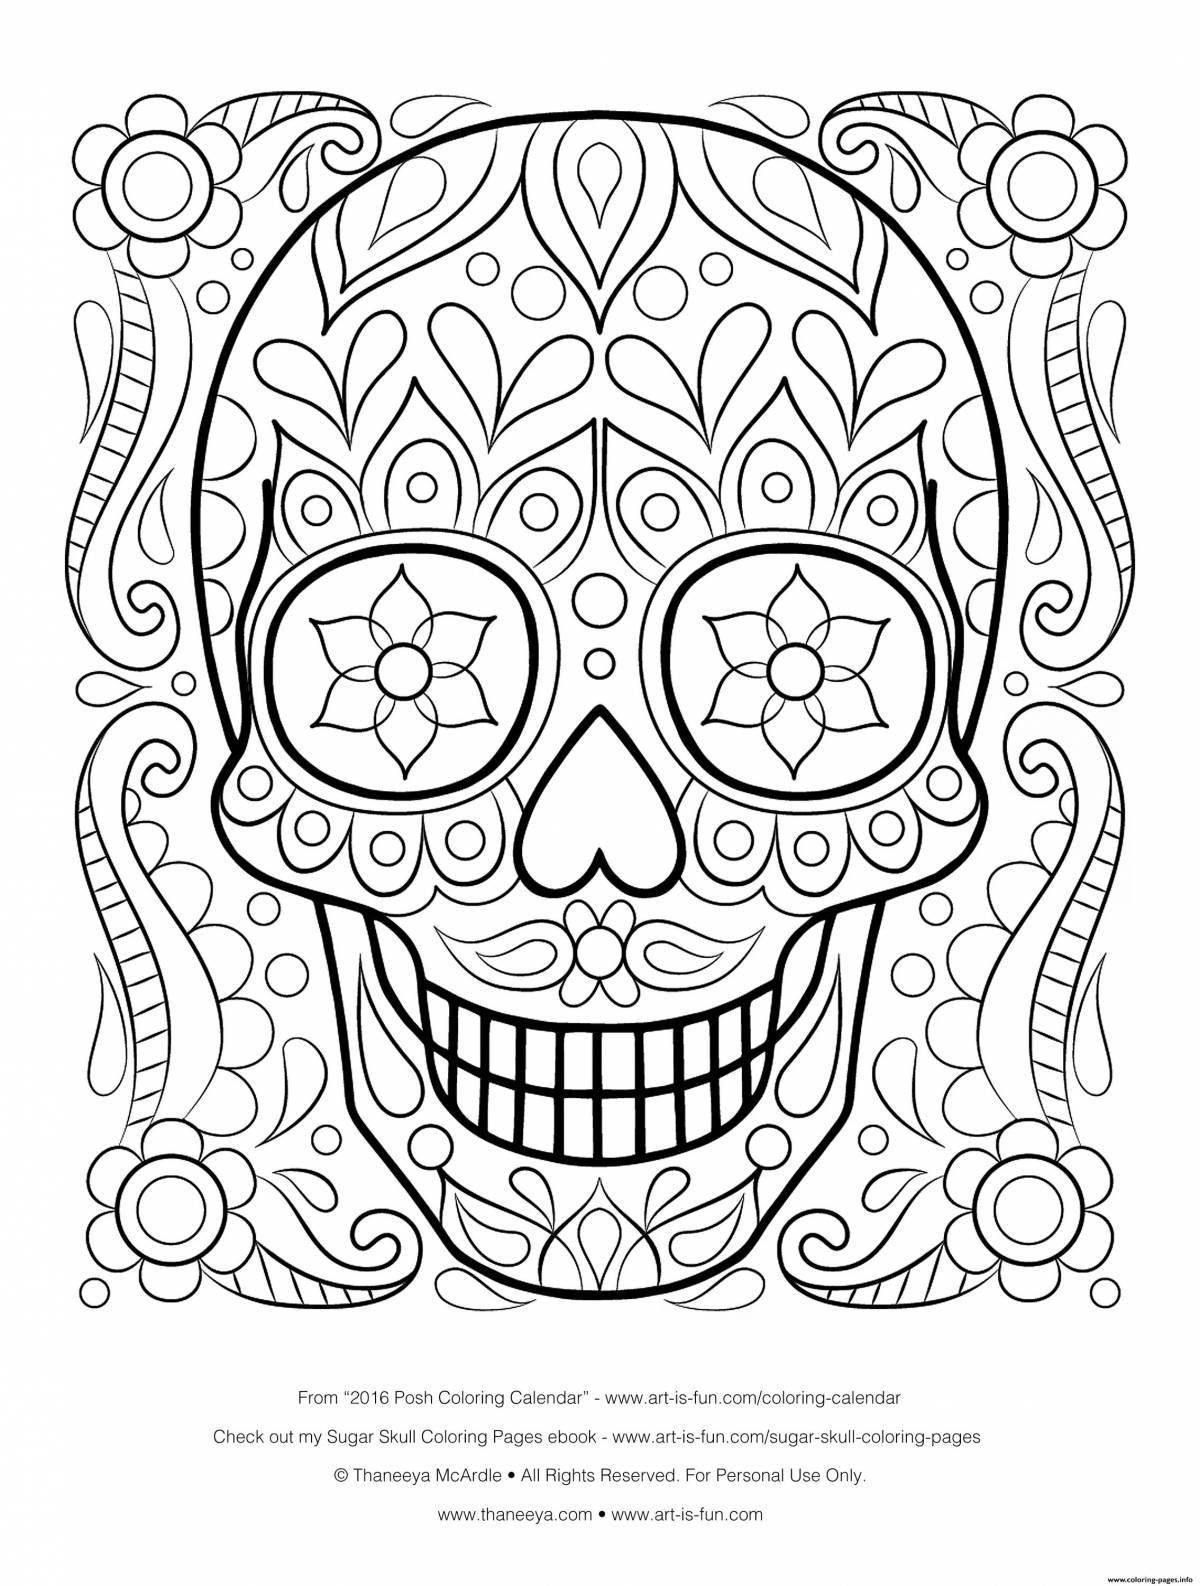 Calm anti-stress coloring page 18